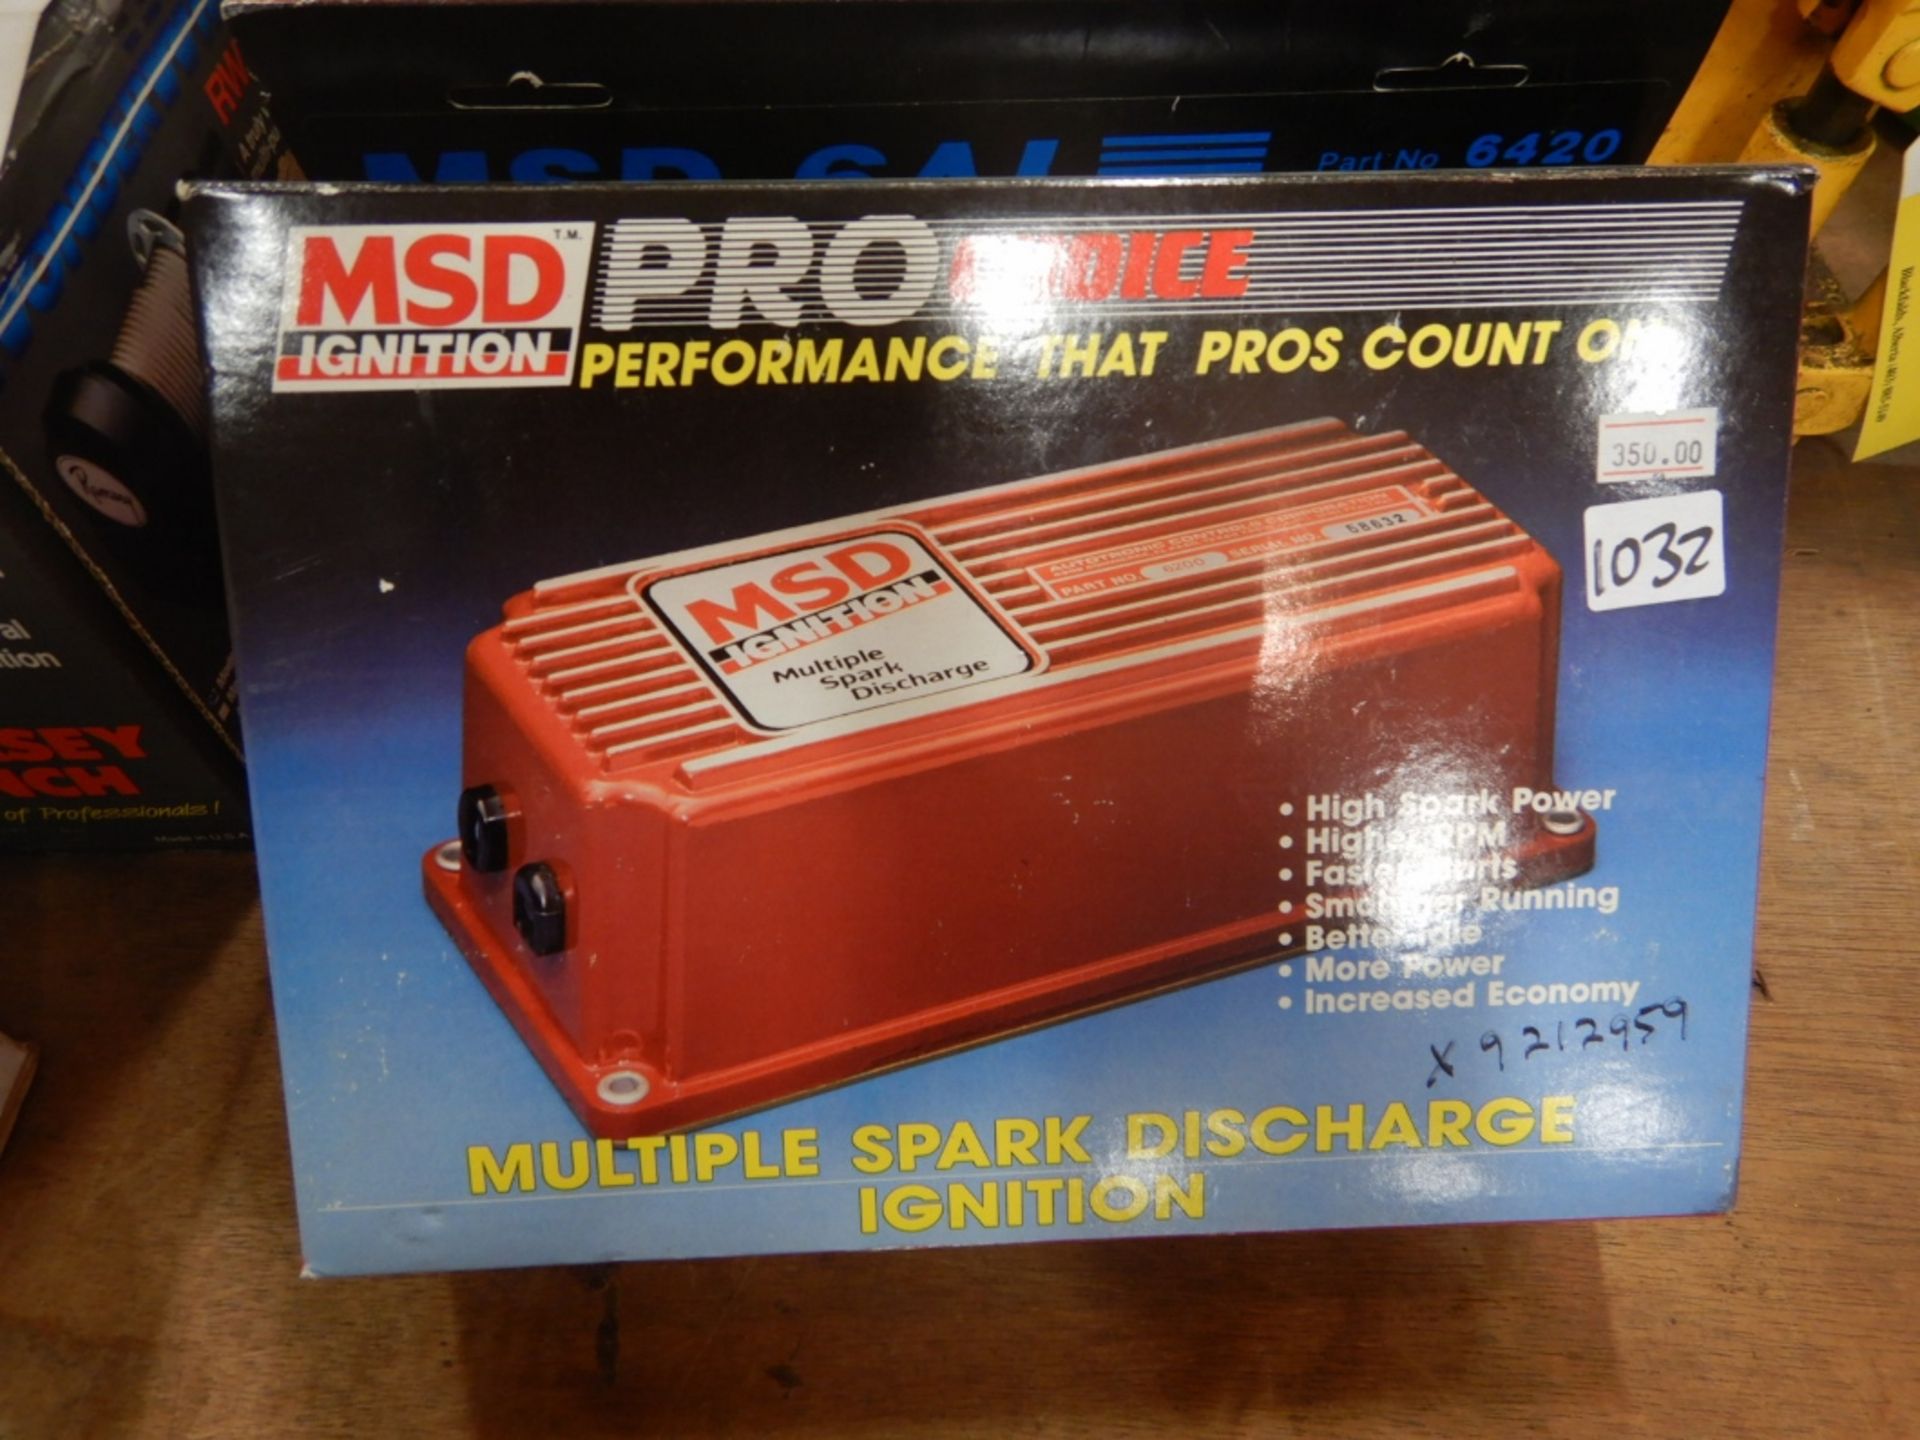 MSD IGNITION PRO CHOICE MULTIPLE SPARK DISCHARGE MICO POWER CYLINDER, SPARK PLUG, REPAIR KIT, - Image 4 of 10